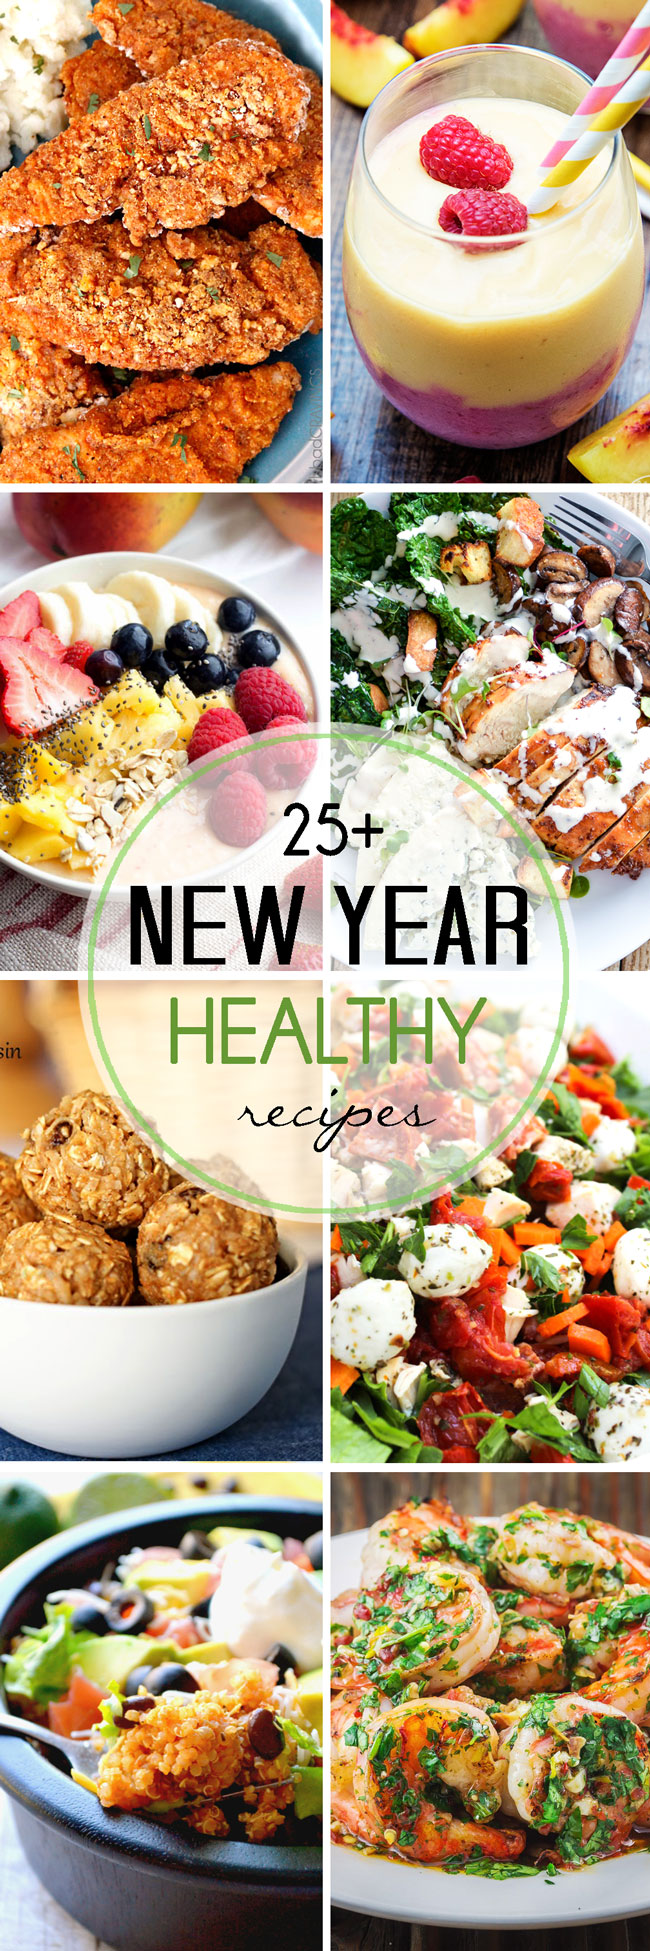 More Than 25 Healthy Recipes for the New Year | White Lights on Wednesday